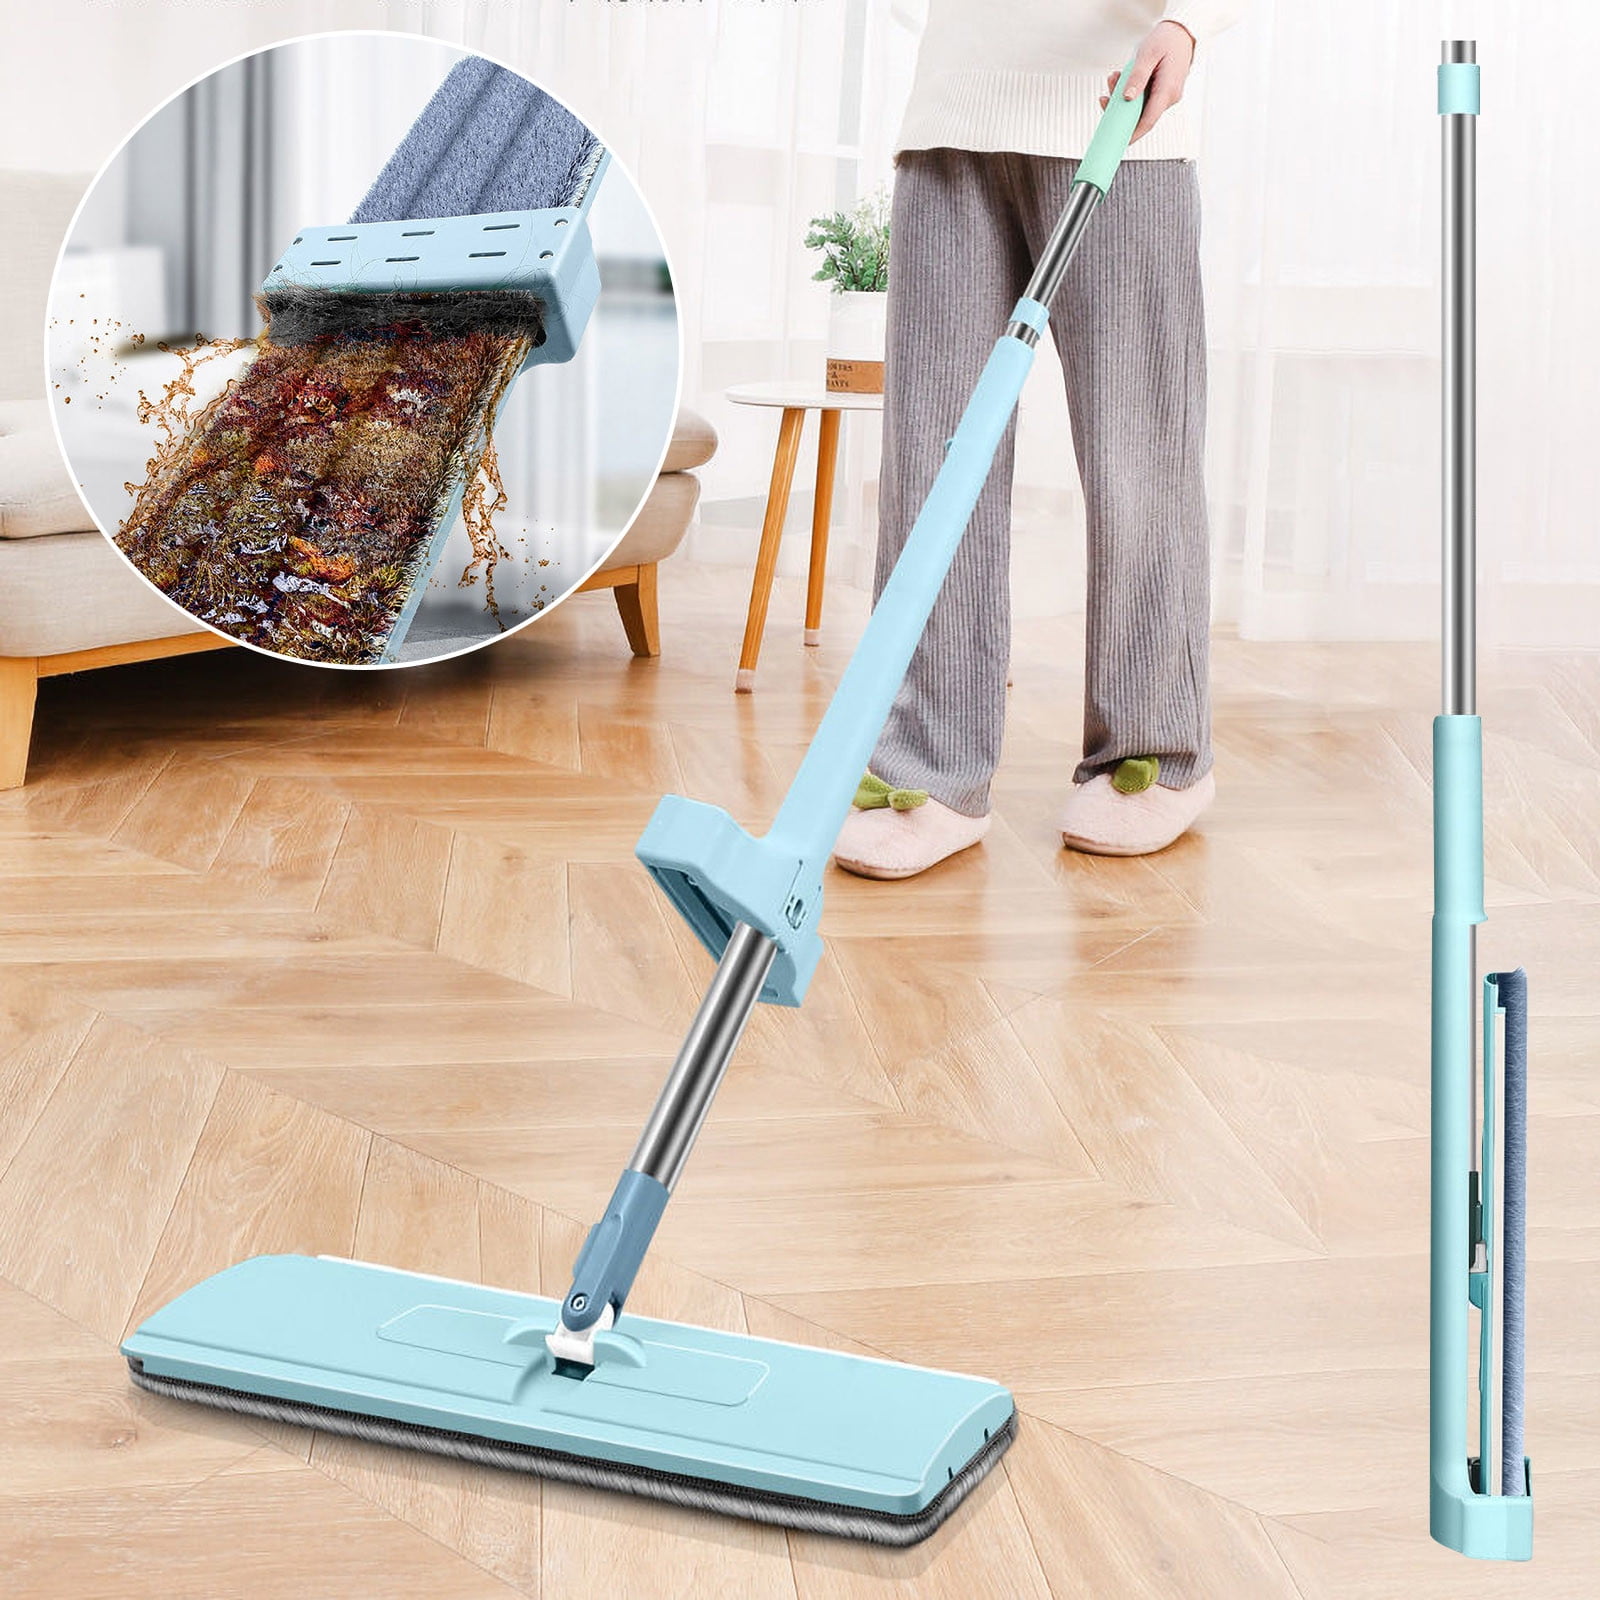 CLEANHOME 24 Commercial Dust Mop for Floor Cleaning, Heavy Duty Floor Mop  with 2 Microfiber Mop Pads Wet and Dry Flat Mop, Commercial Cleaning Tools